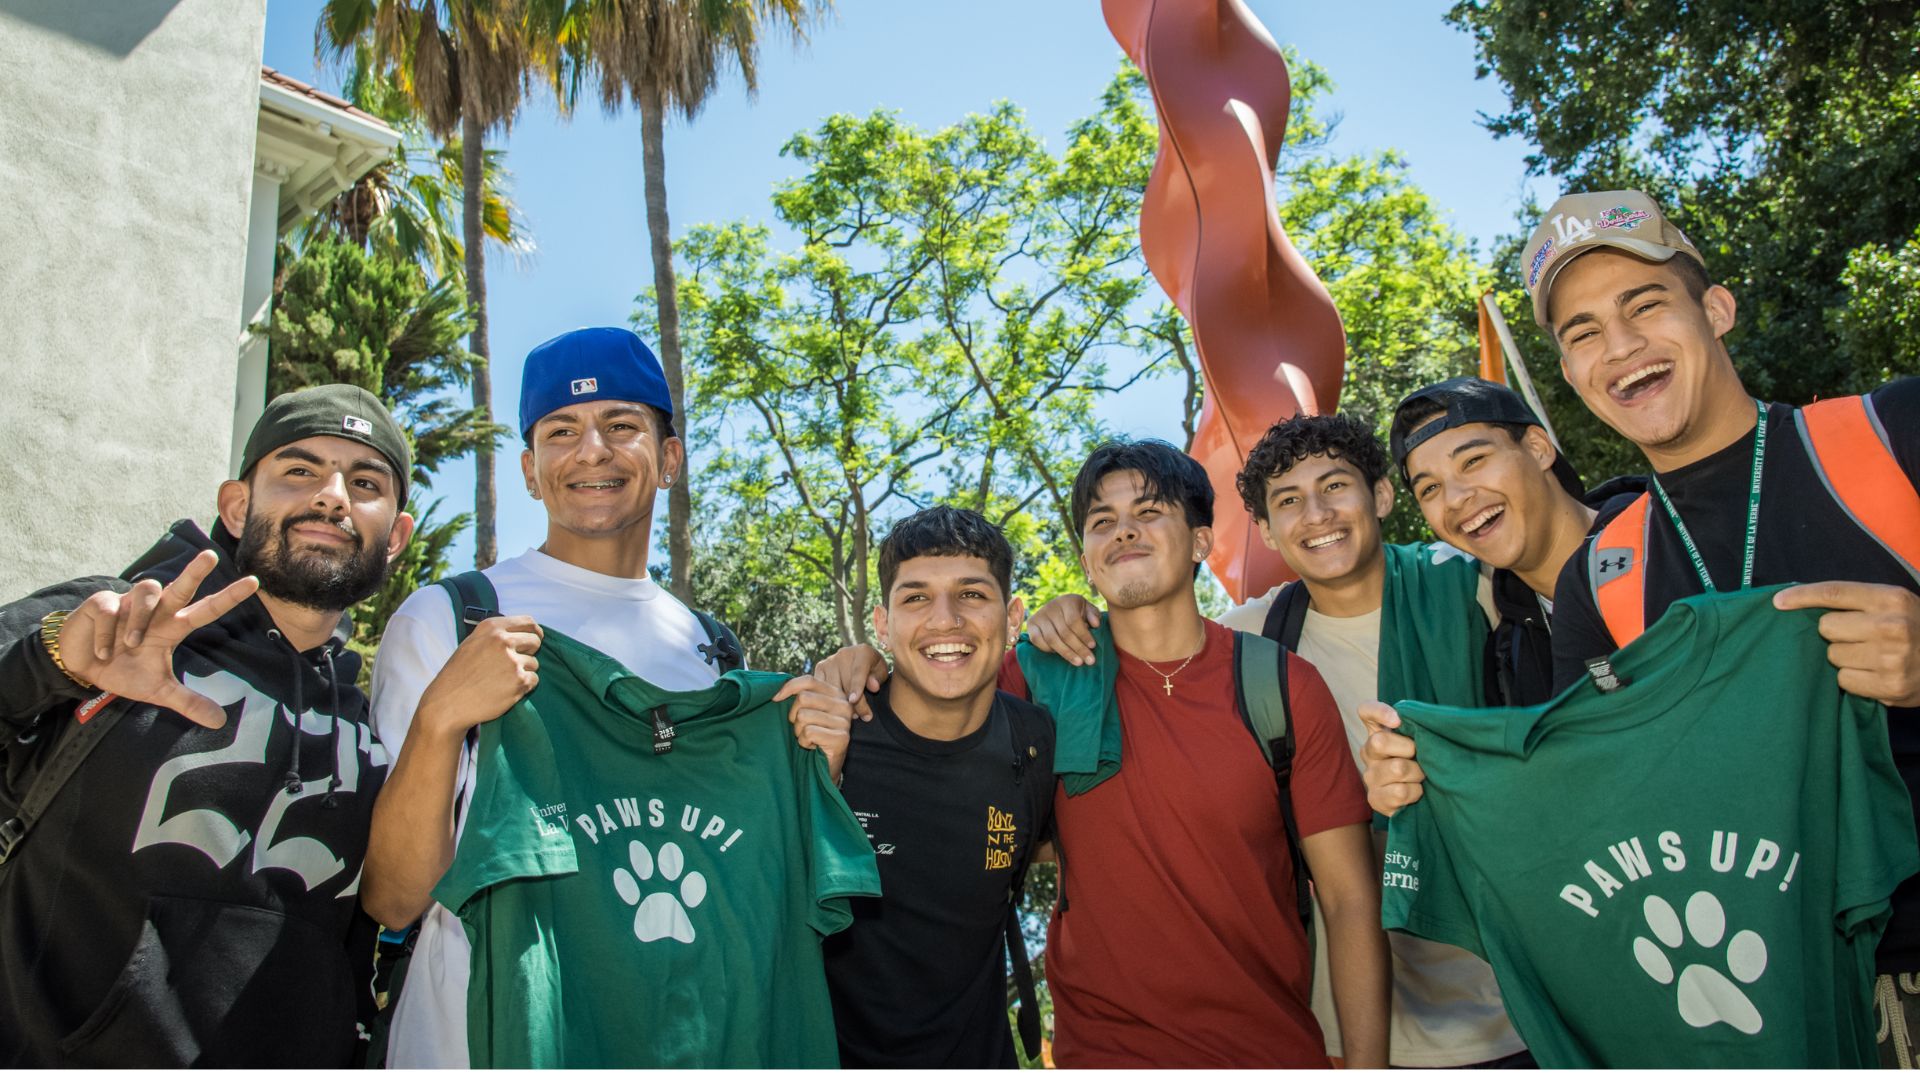 Students smiling in a group with paws up t-shirts during 2023-2024 convocation ceremony